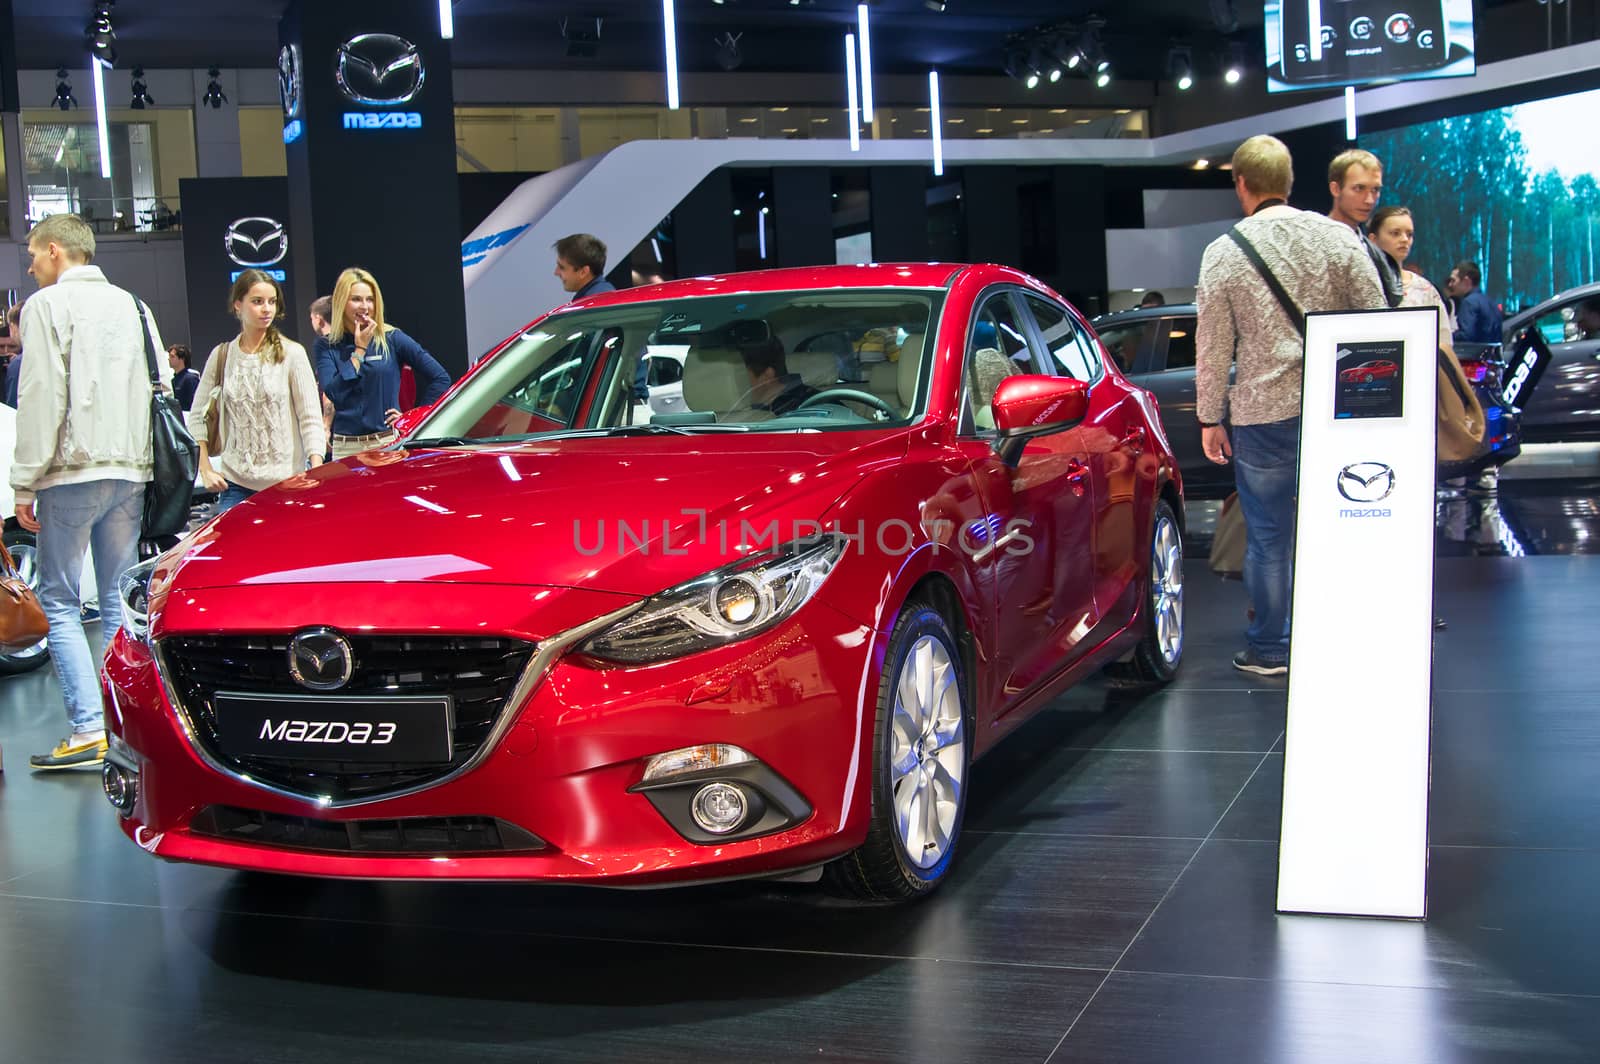 Moscow-September 2: Mazda 3 at the Moscow International Automobile Salon on September 2, 2014 in Moscow